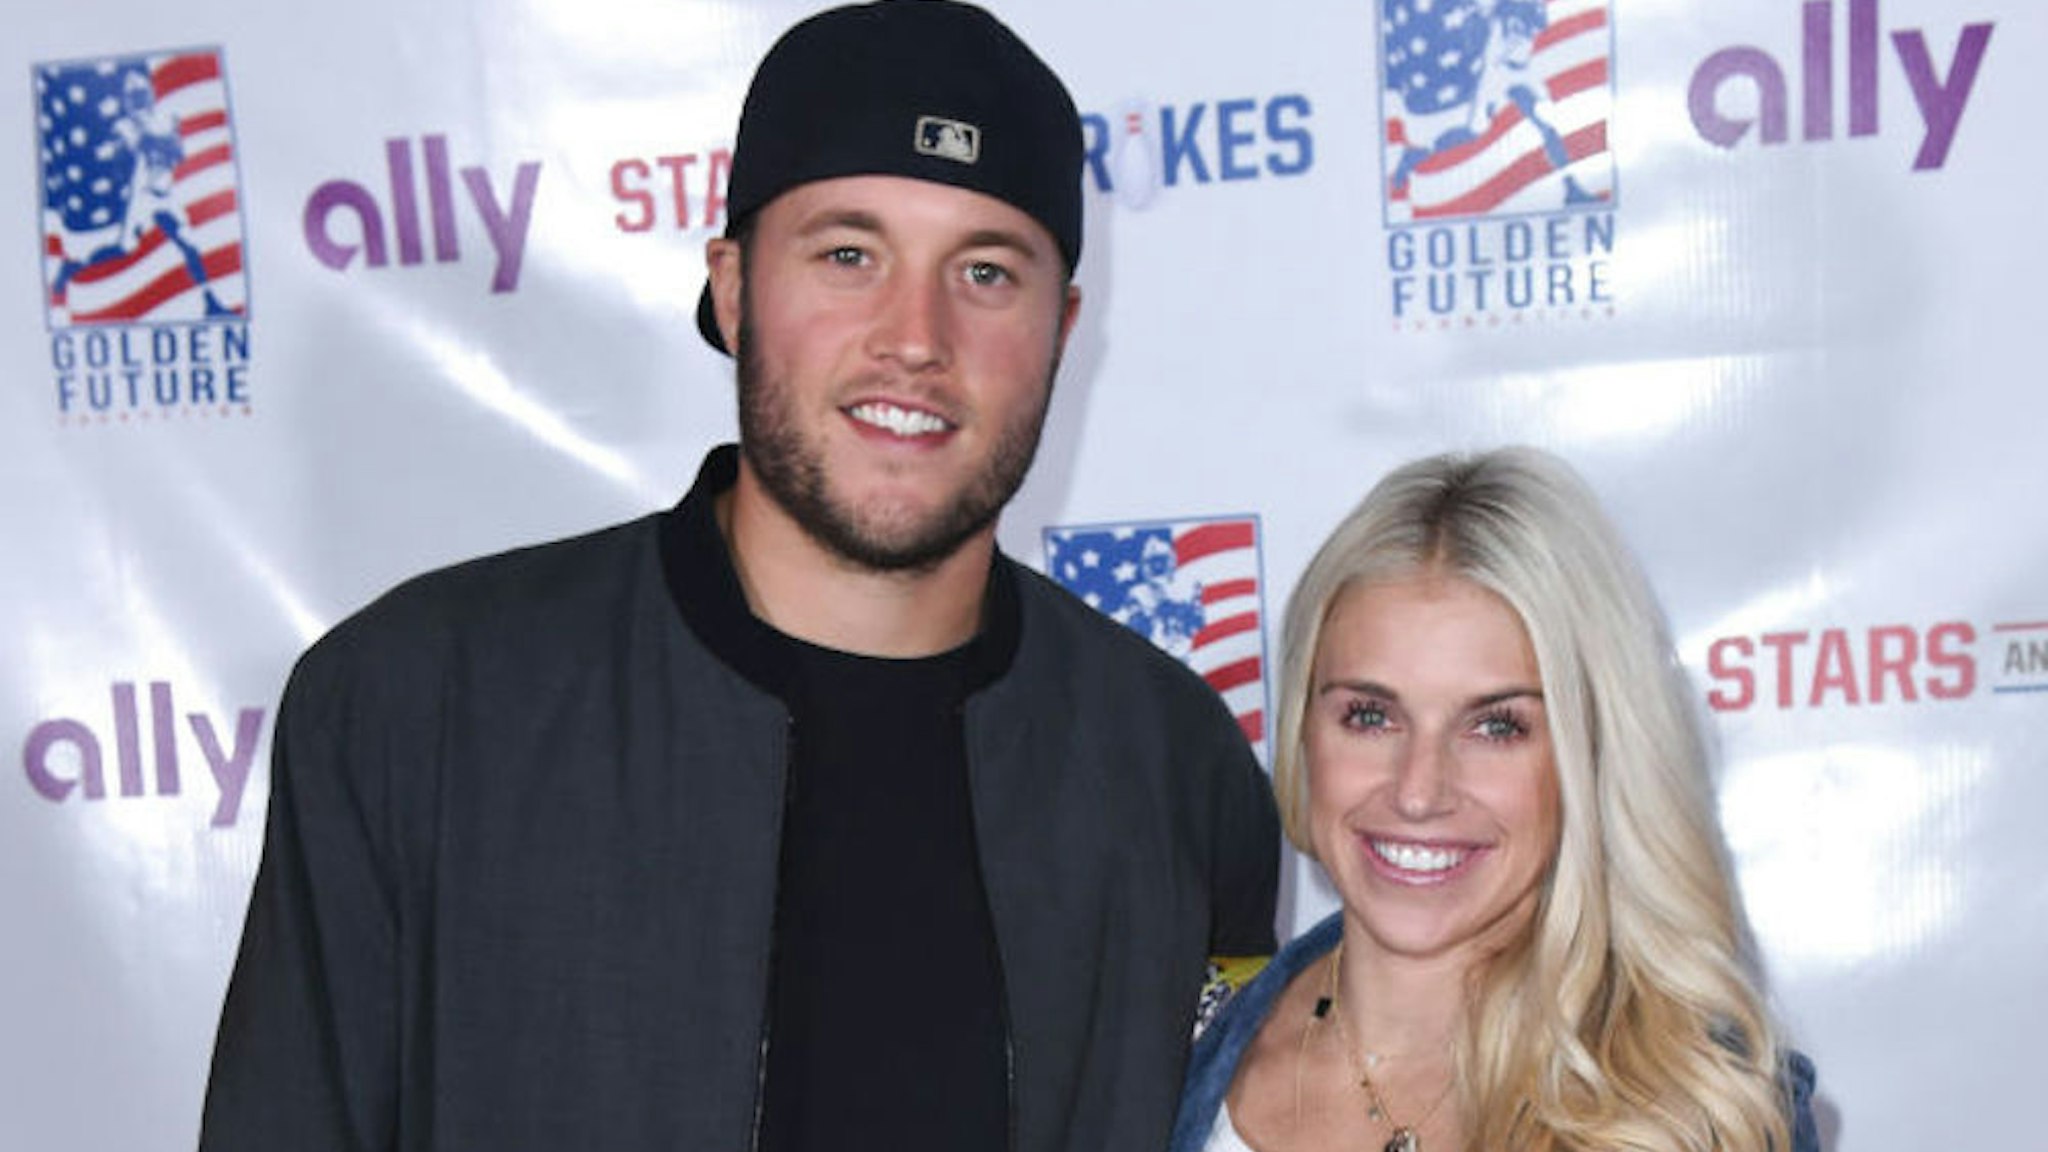 DETROIT, MI - SEPTEMBER 11: Matthew Stafford and Kelly Stafford arrive to Golden Tate's 3rd Annual Stars and Strikes Bowling Event on September 11, 2017 in Detroit, Michigan. (Photo by Aaron J. Thornton/Getty Images)